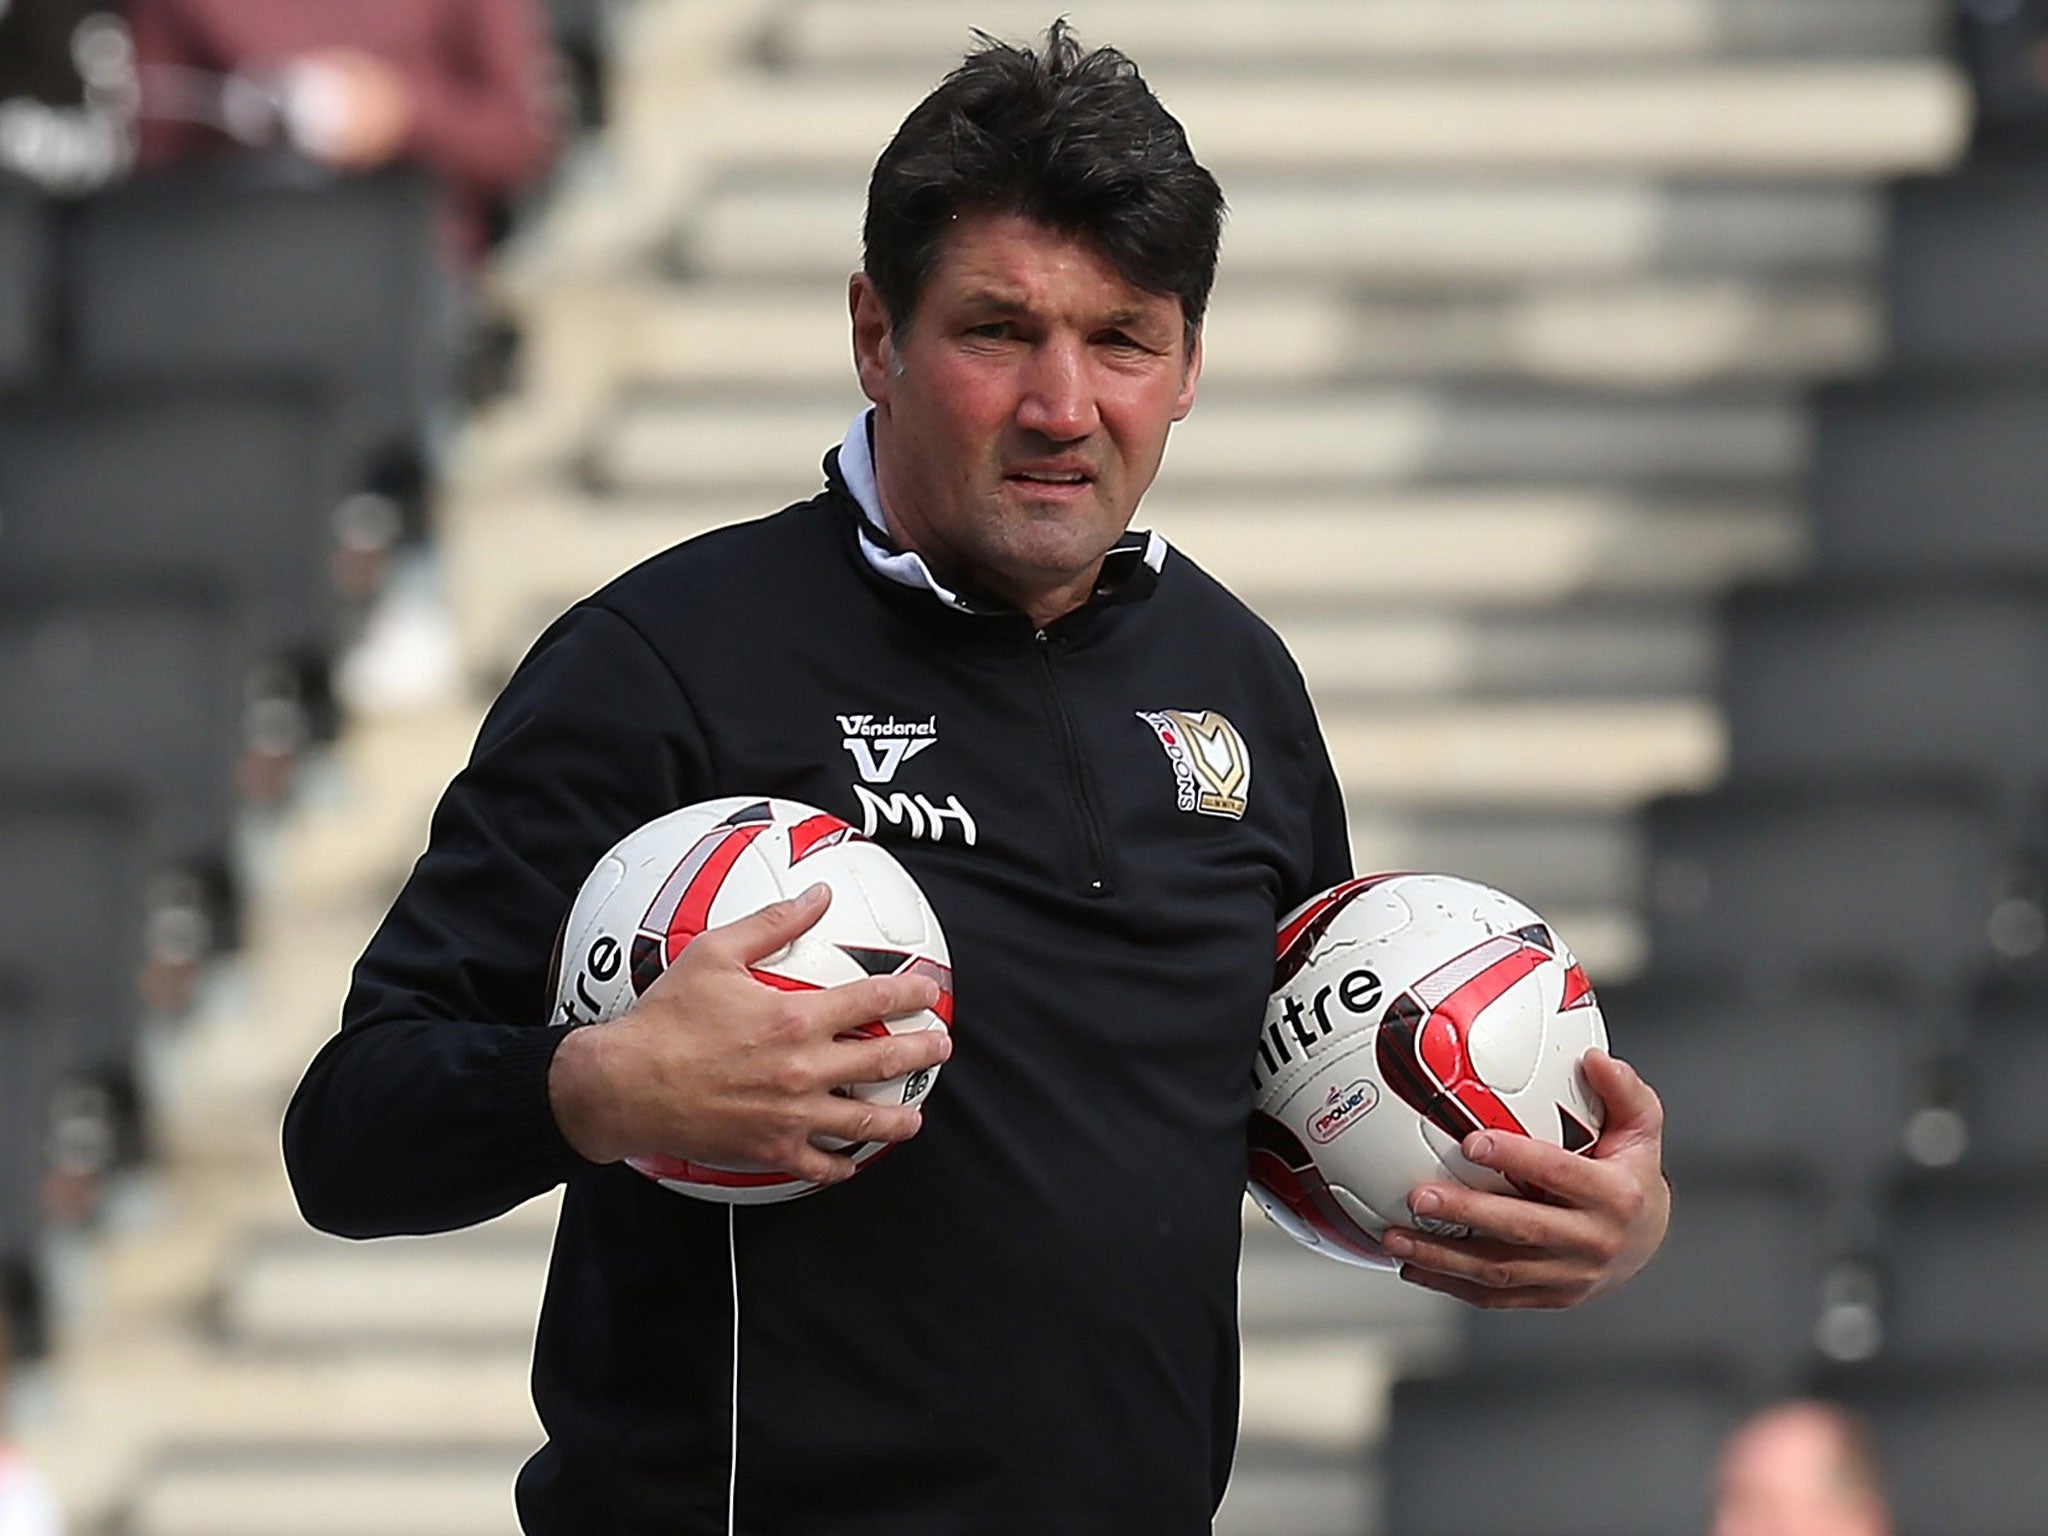 Turf luck: Mick Harford hit an own goal in Luton’s last match on plastic